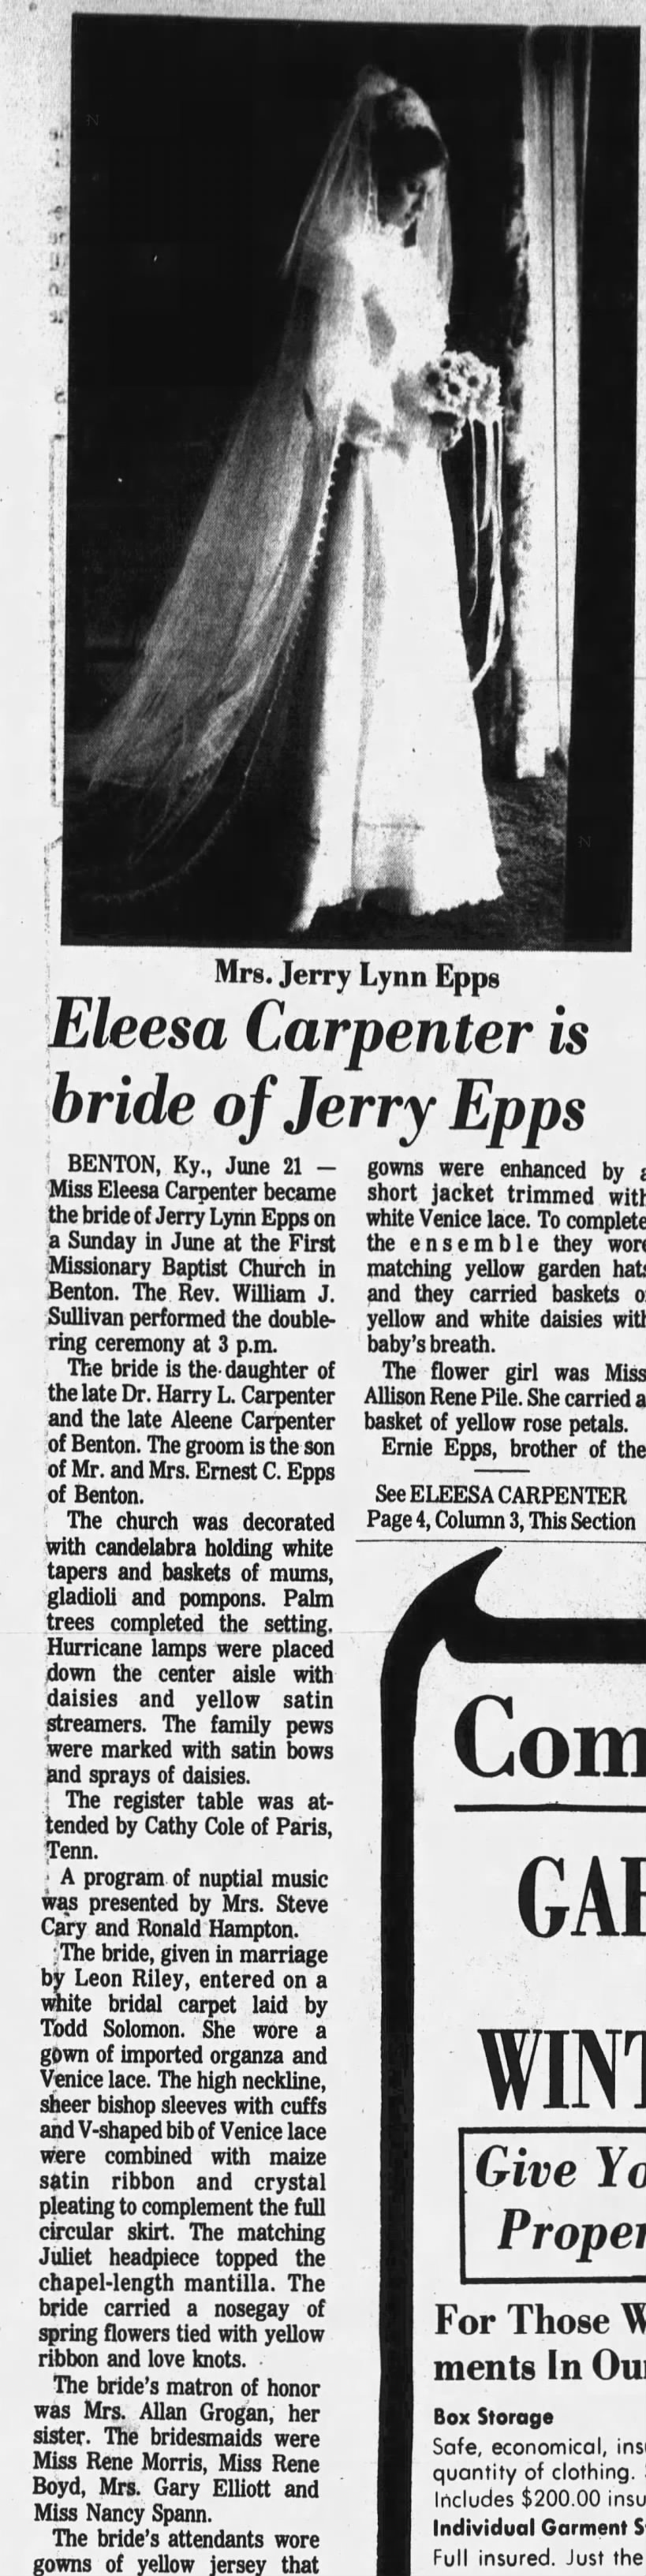 Marriage of Carpenter / Epps